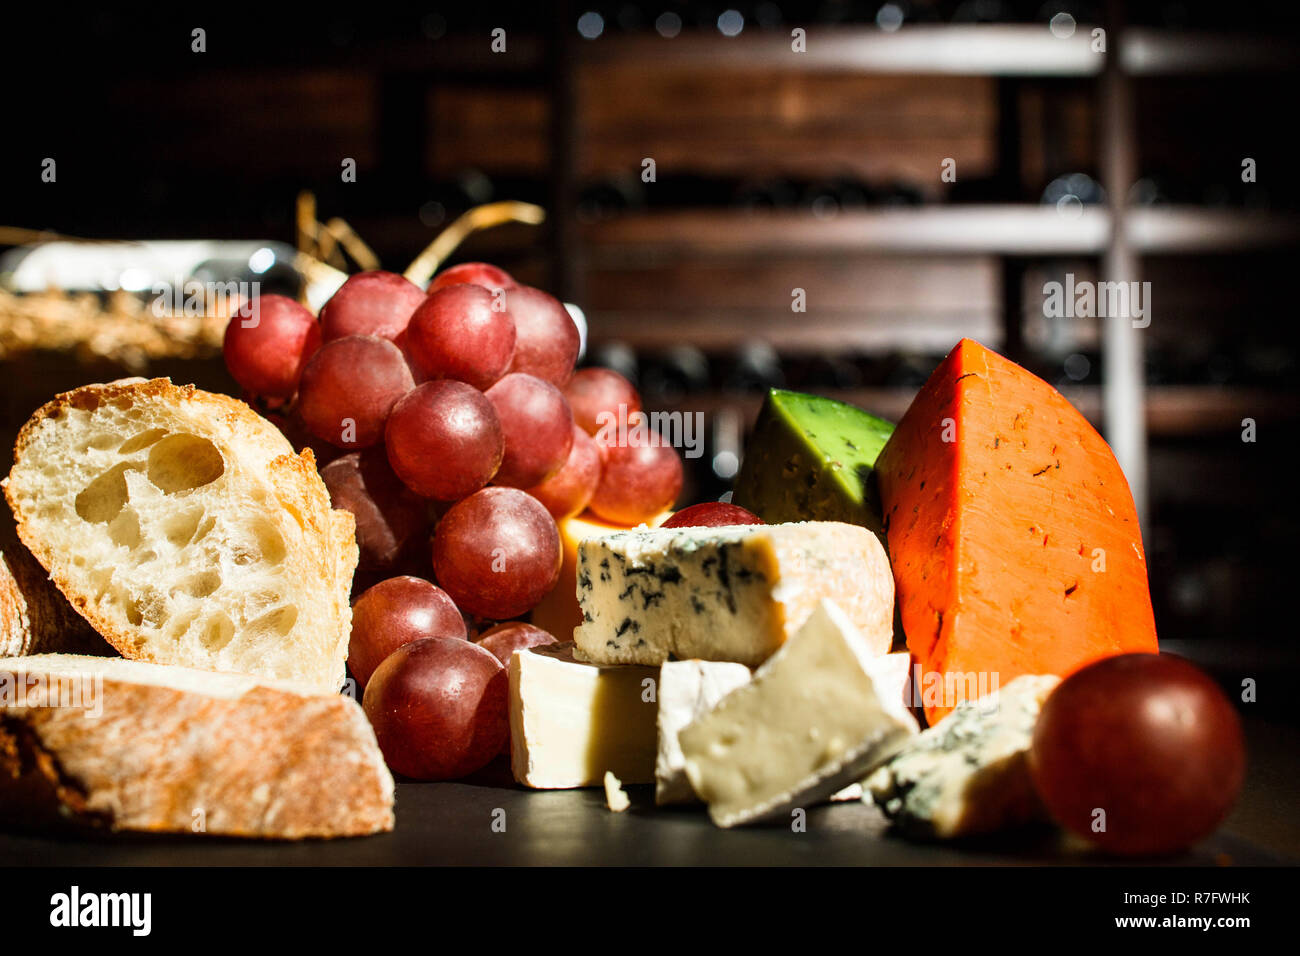 Delicious fresh baked bread lies on plate with cheese Stock Photo